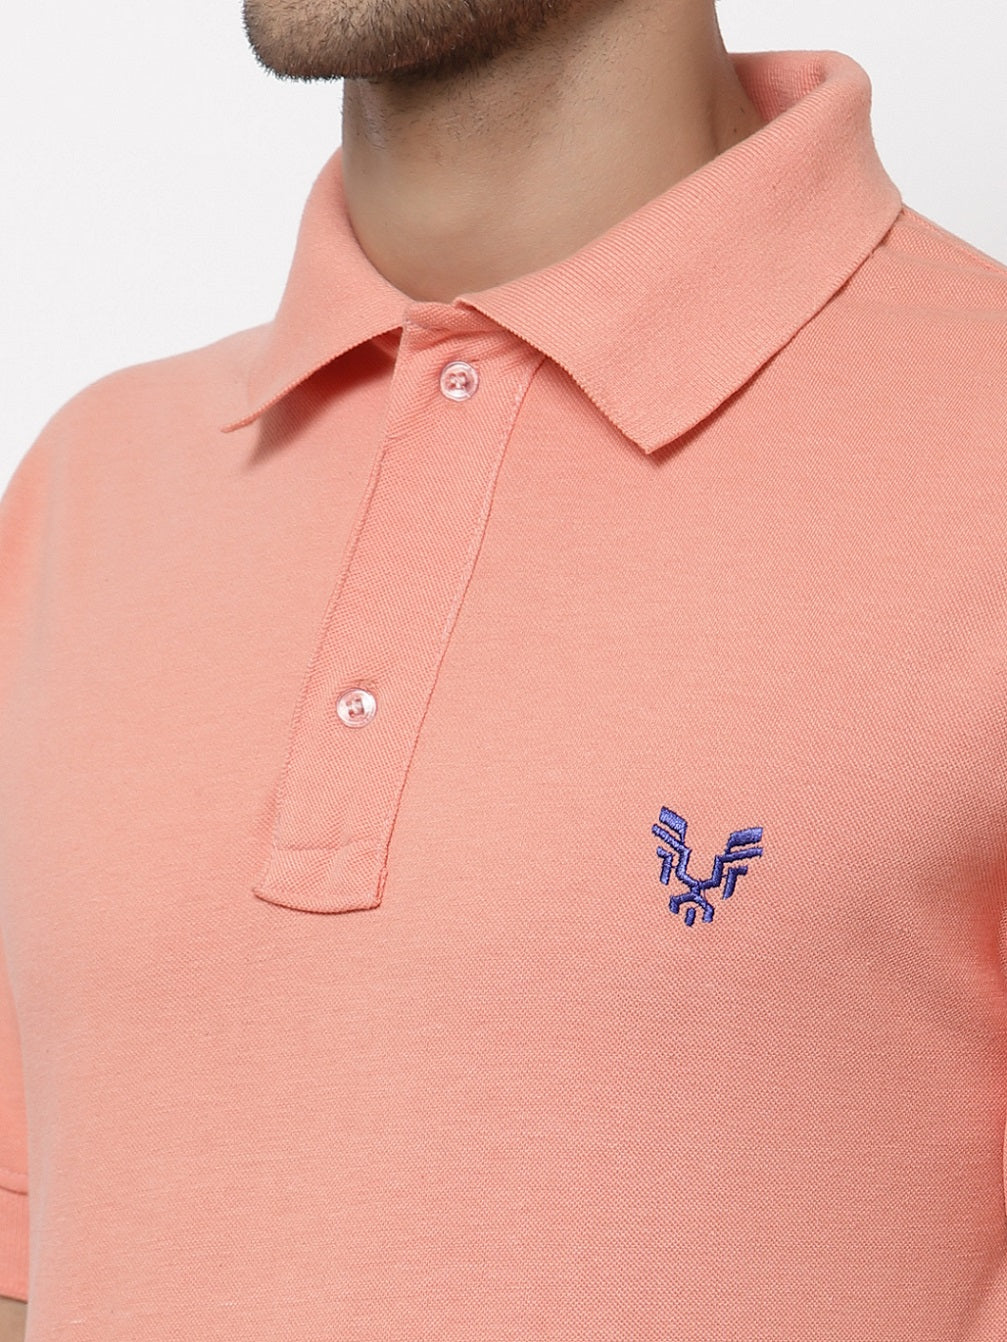 Buy polo t shirts for men online in india